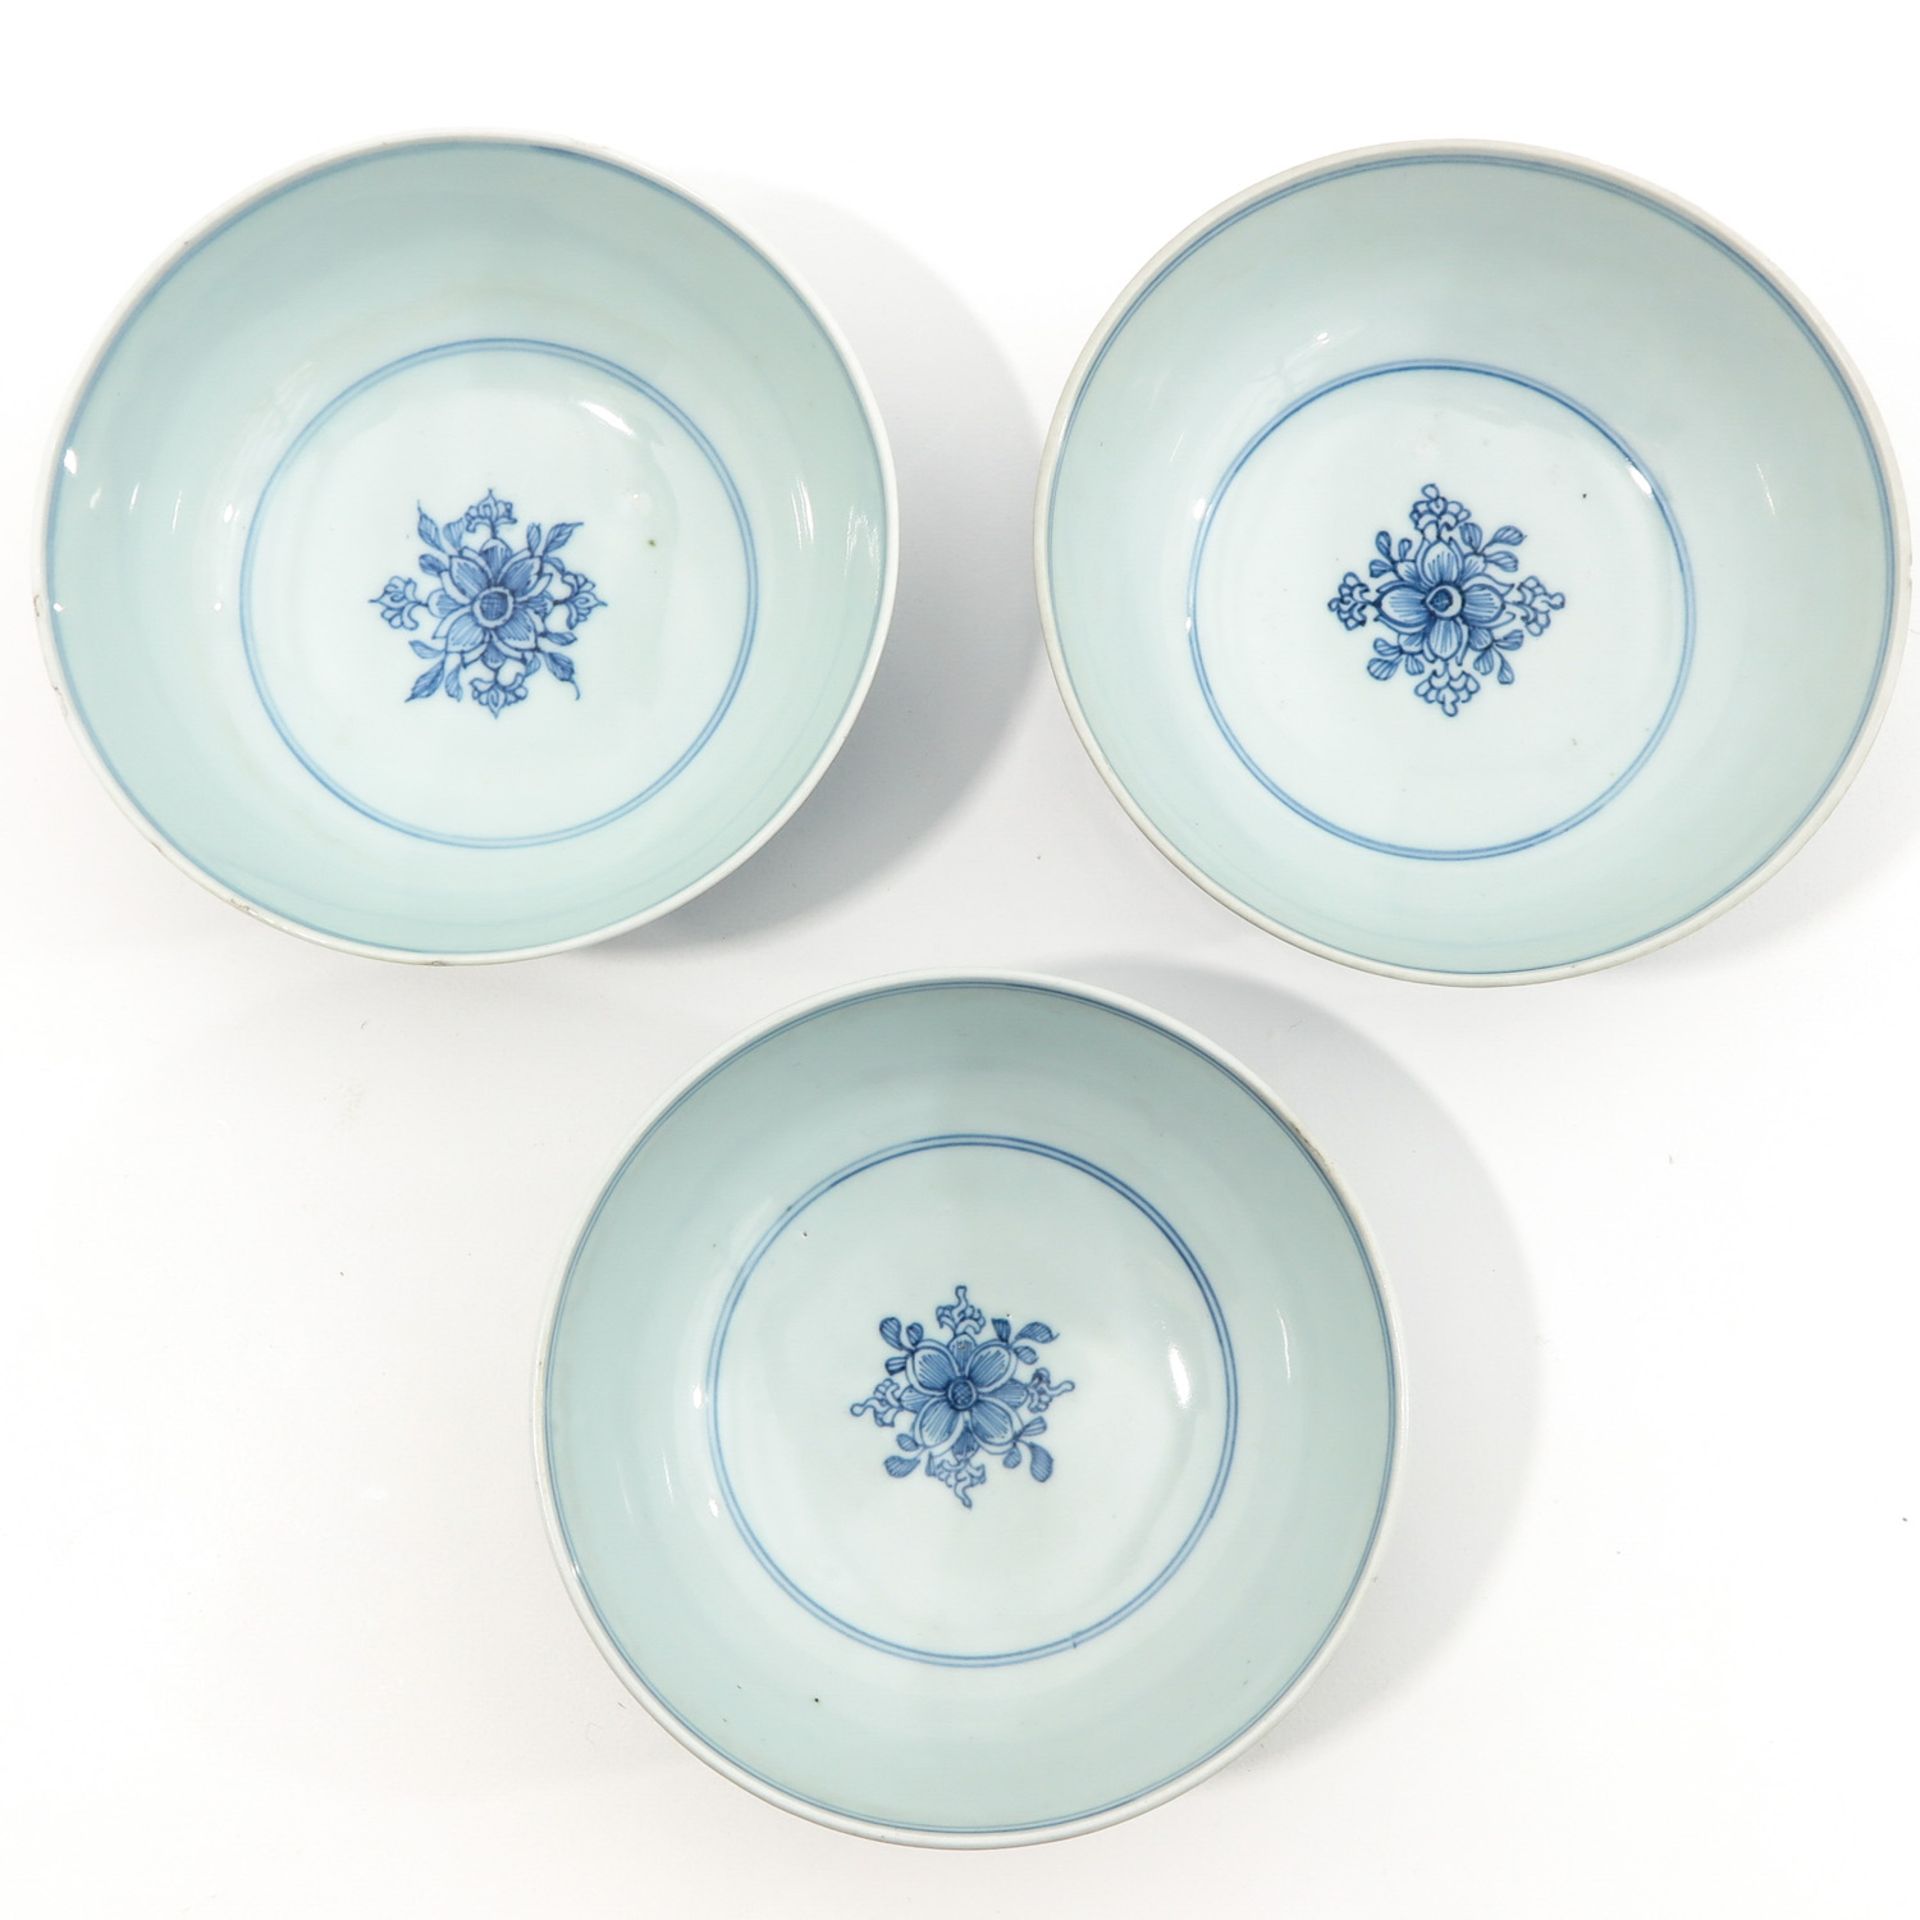 A Series of 3 Blue and White Bowls - Image 5 of 10